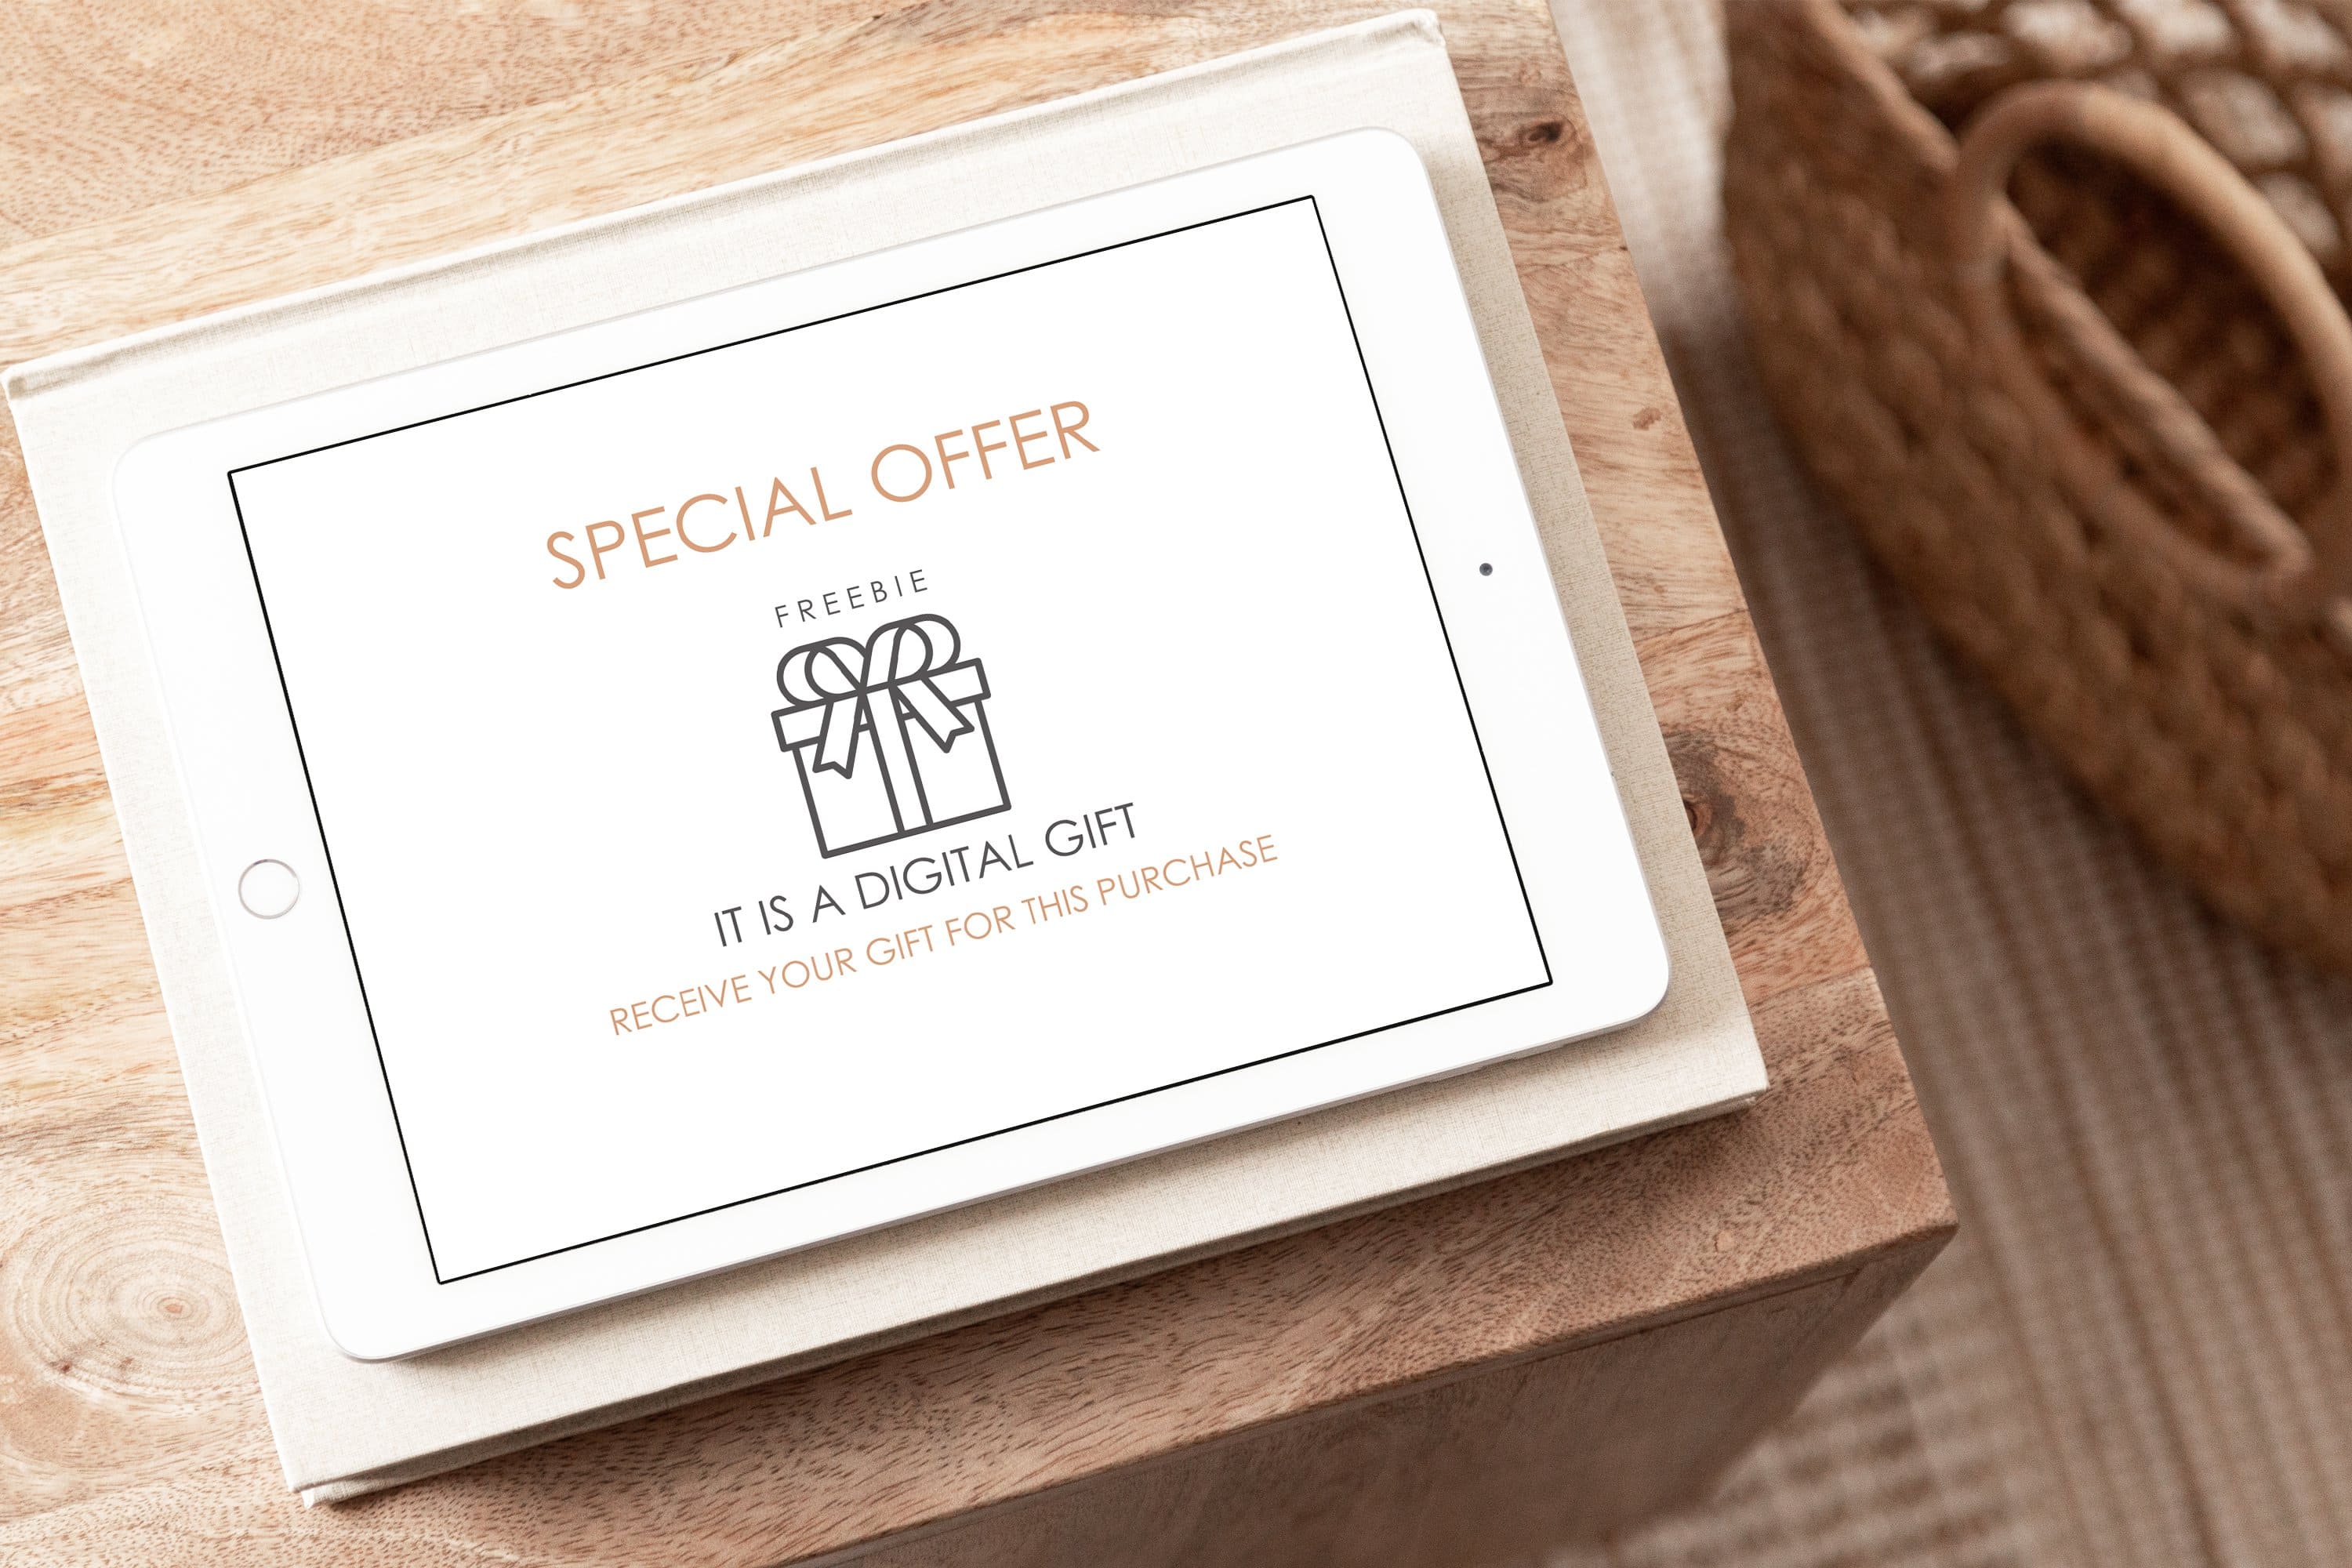 Special offer is a digital gift.